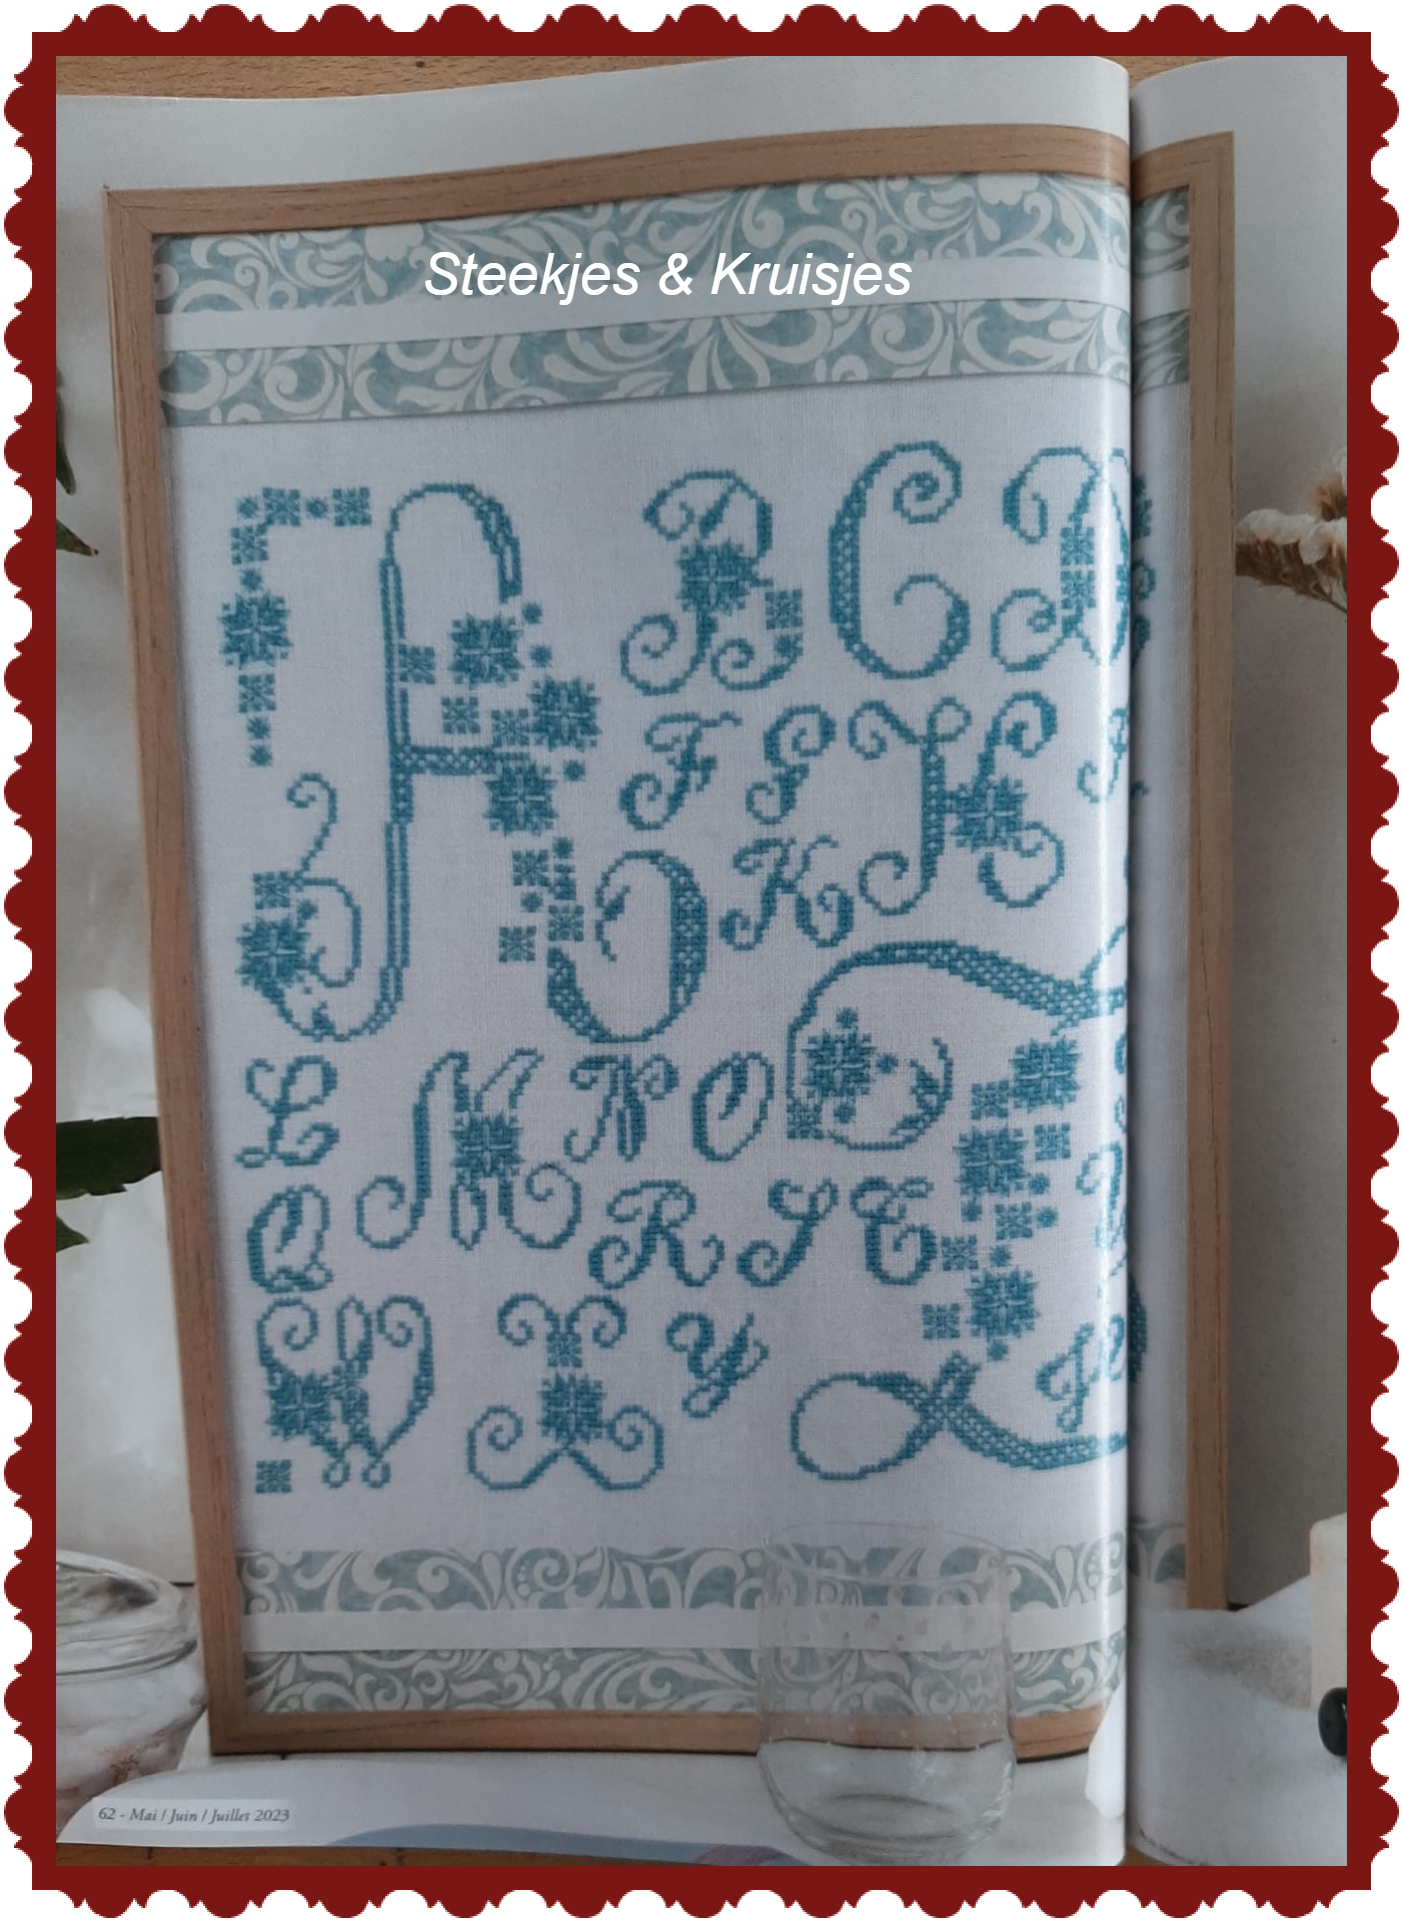 <tc>Special edition from the French Cross Stitch Magazine "Creation Point de Croix" with the patterns from 12 complete samplers!</tc>